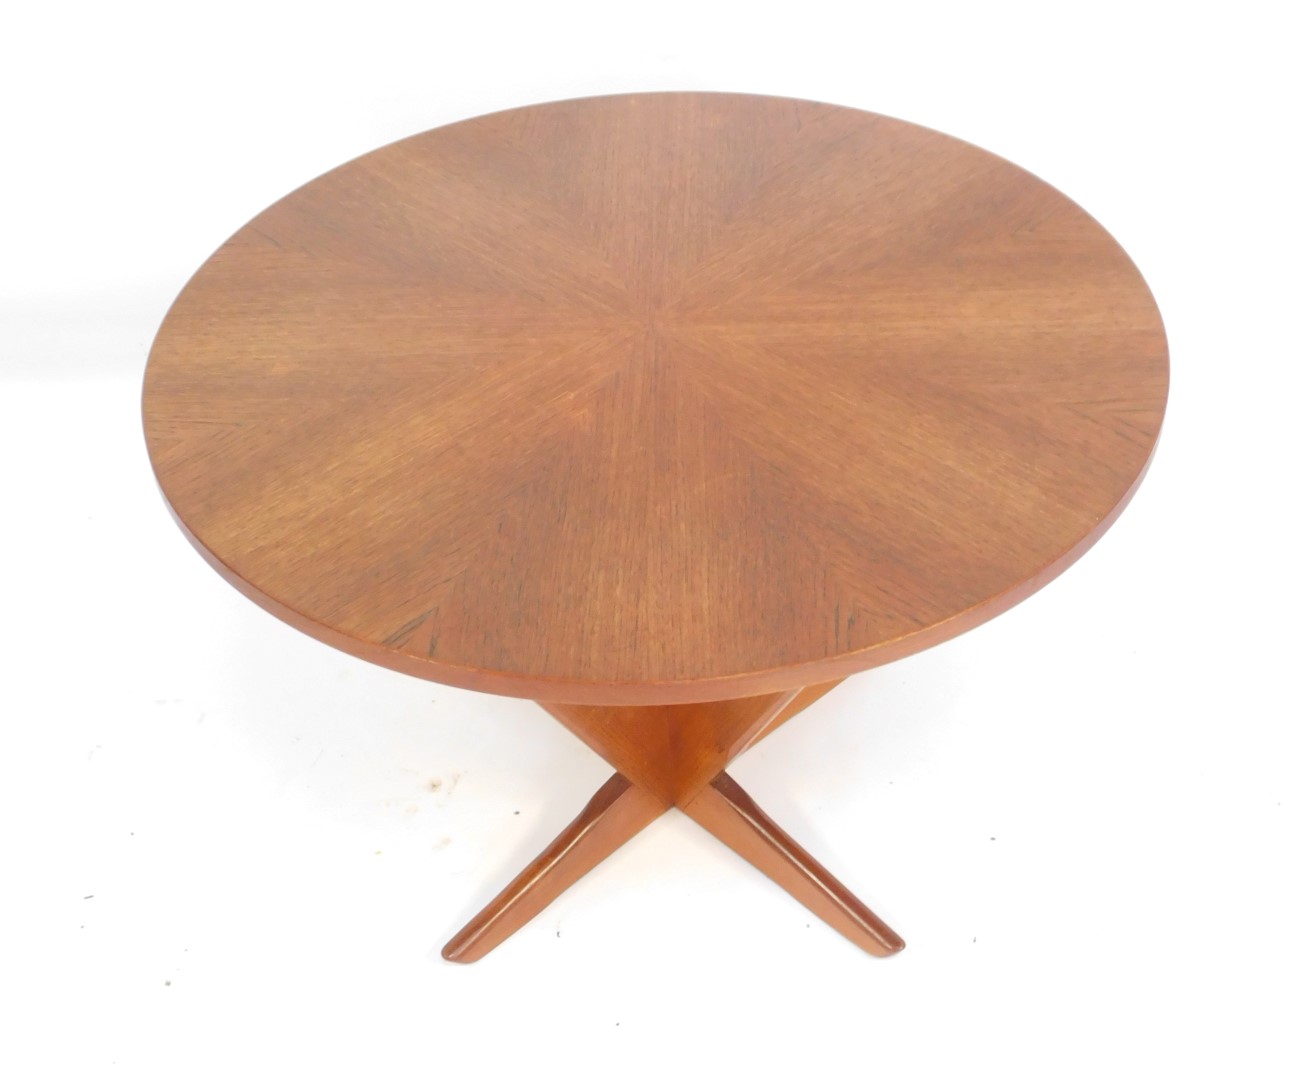 A Soren Georg Jensen Kubus radial teak Danish coffee table, with a sectional circular top, raised on - Image 2 of 2